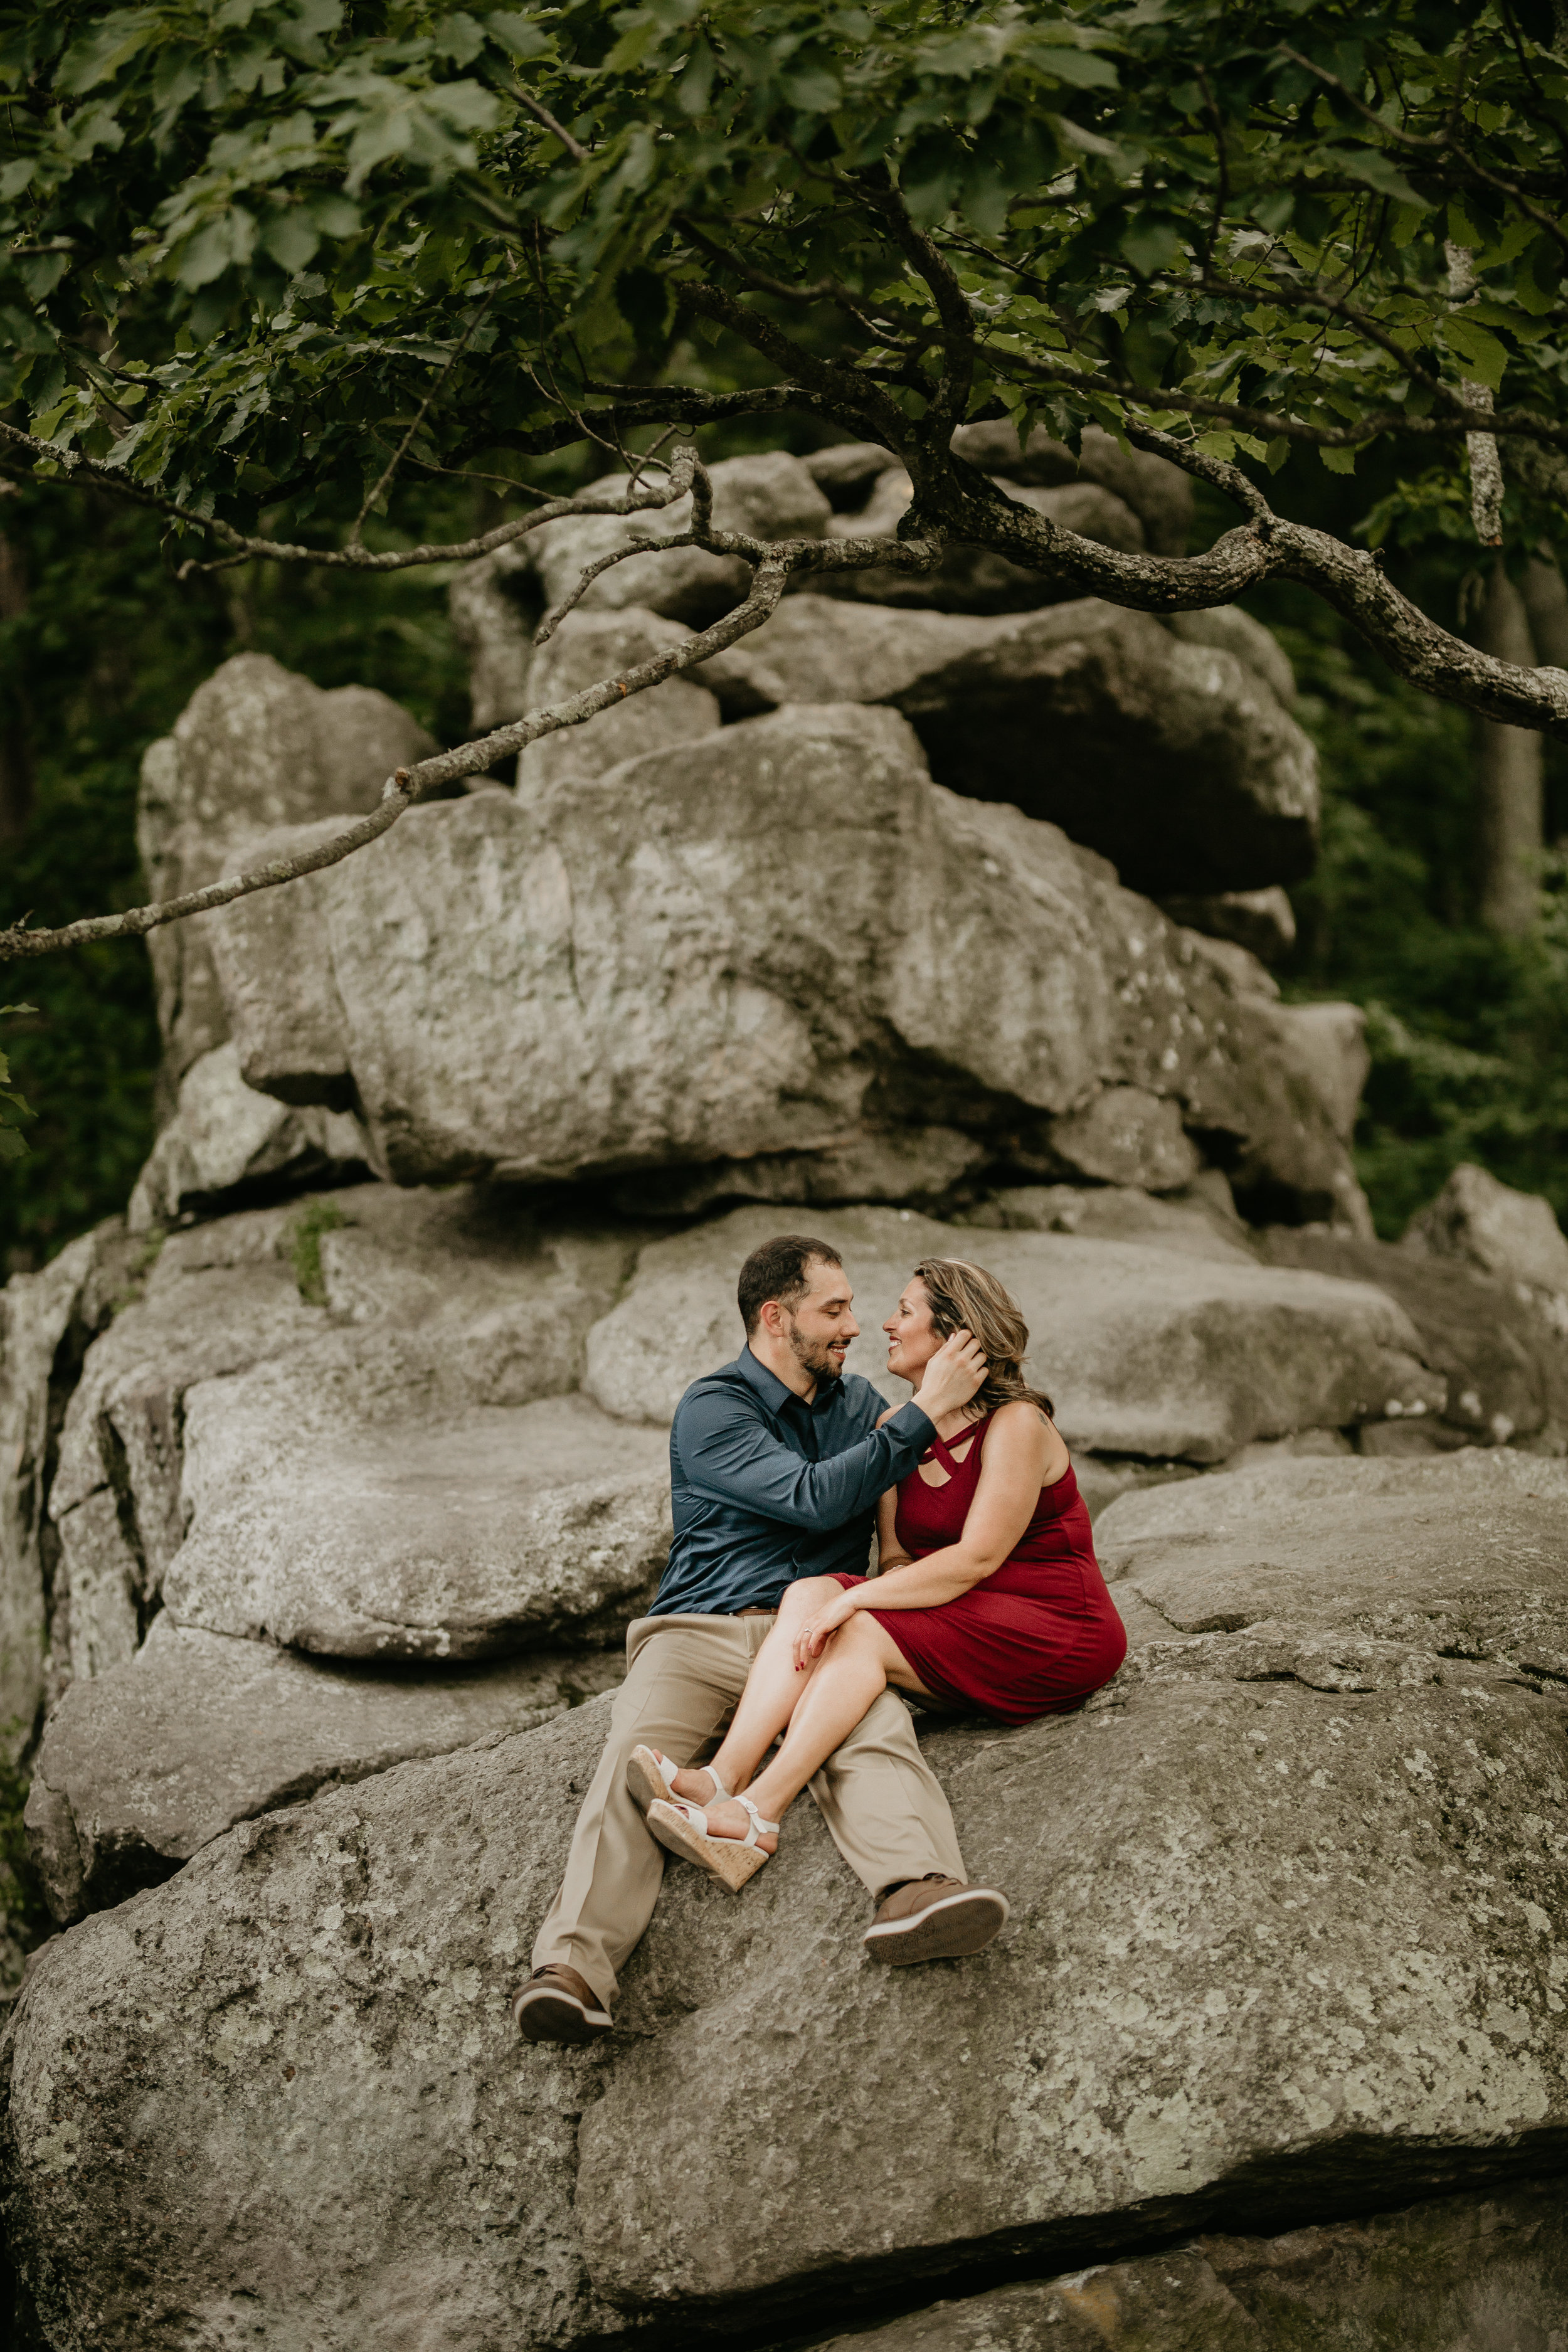 Nicole-Daacke-Photography-rock-state-park-overlook-king-queen-seat-maryland-hiking-adventure-engagement-session-photos-portraits-summer-bel-air-dog-engagement-session-19.jpg